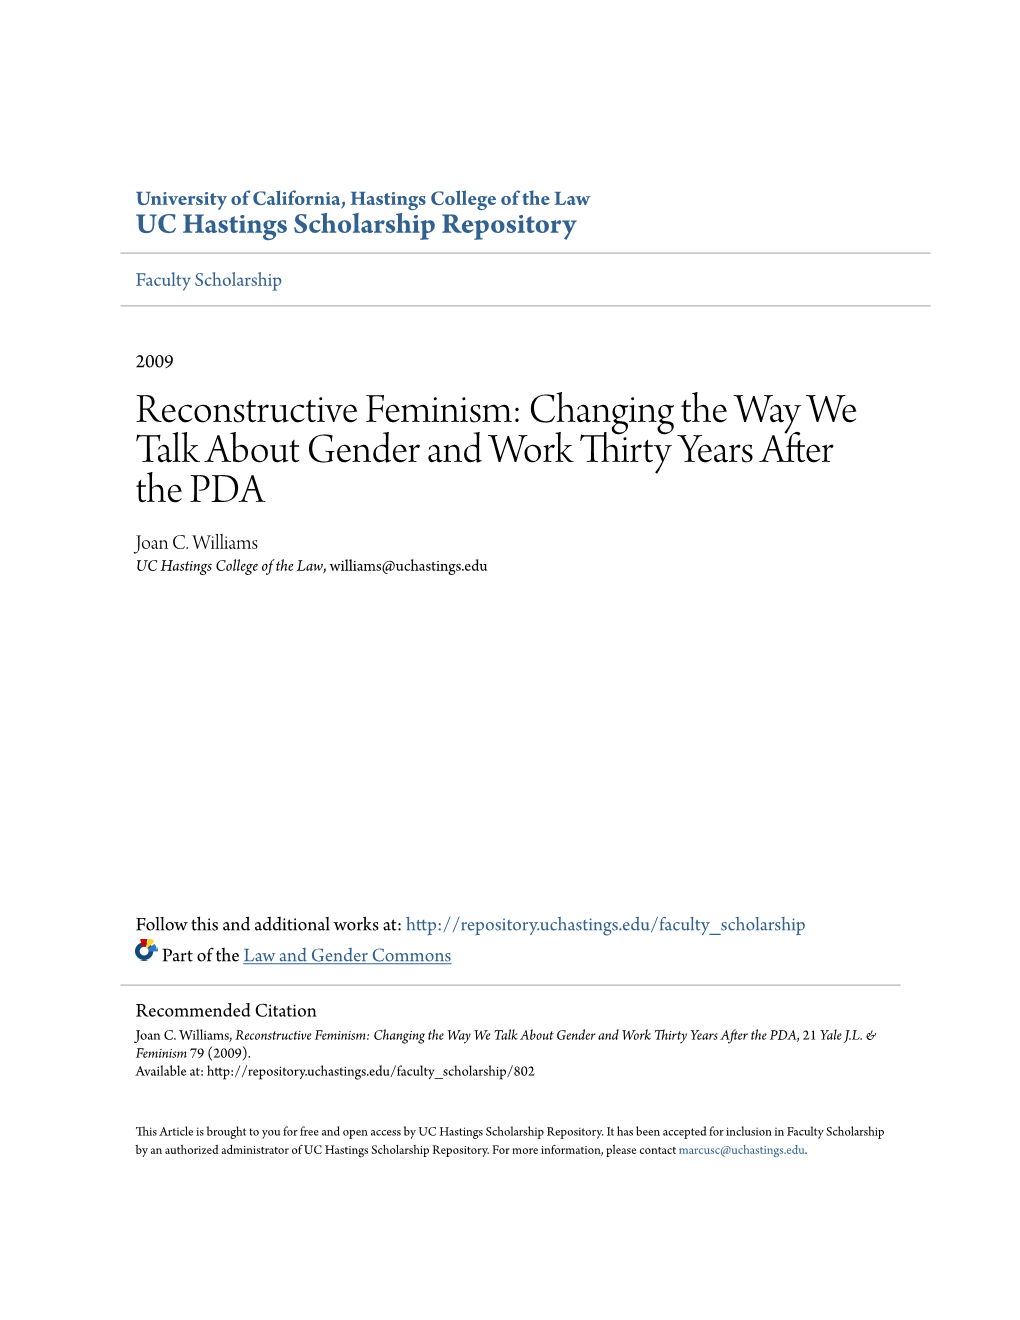 Reconstructive Feminism: Changing the Way We Talk About Gender and Work Thirty Years After the PDA Joan C